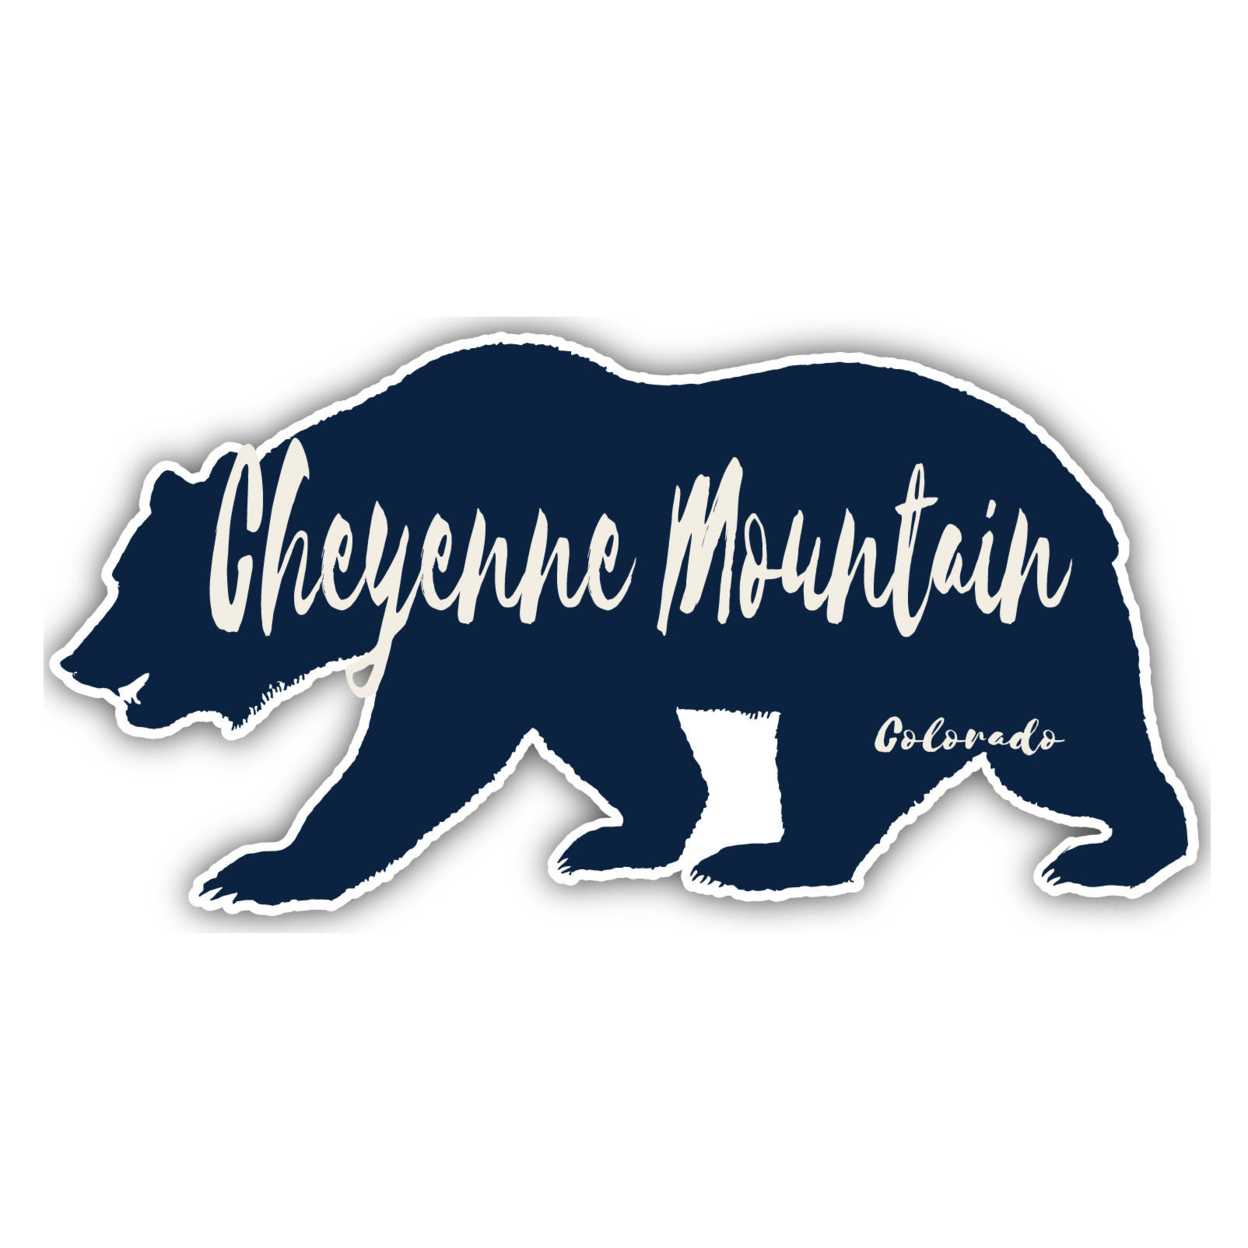 Cheyenne Mountain Colorado Souvenir Decorative Stickers (Choose Theme And Size) - 4-Pack, 10-Inch, Tent